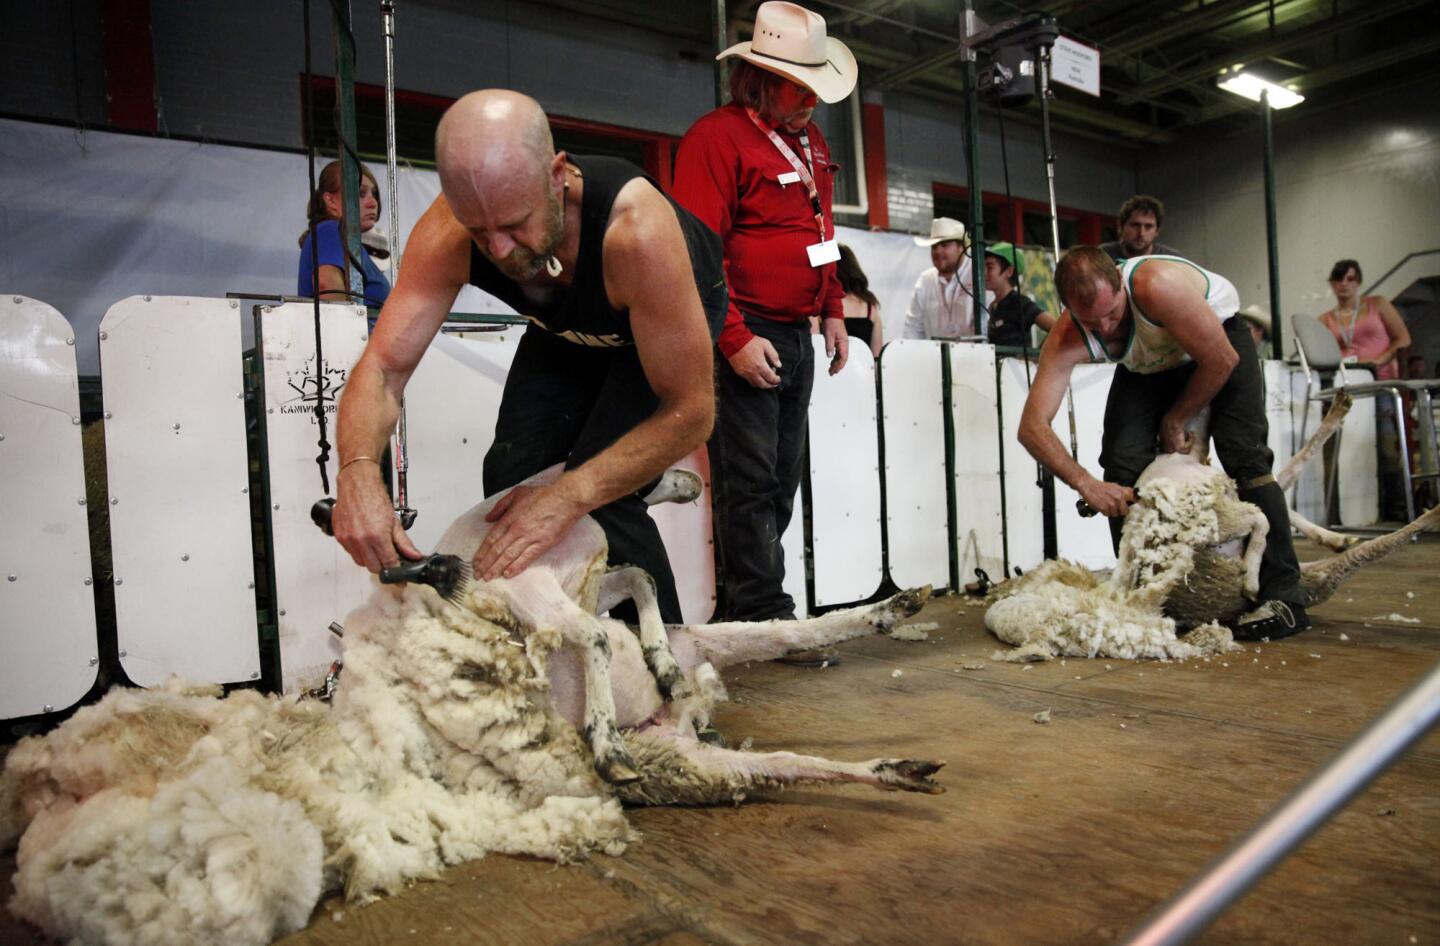 Besides parades, rodeo events and unhealthy food, the Calgary Stampede features sheep shearing. These sheep and shearers were part of the opening weekend in 2013.